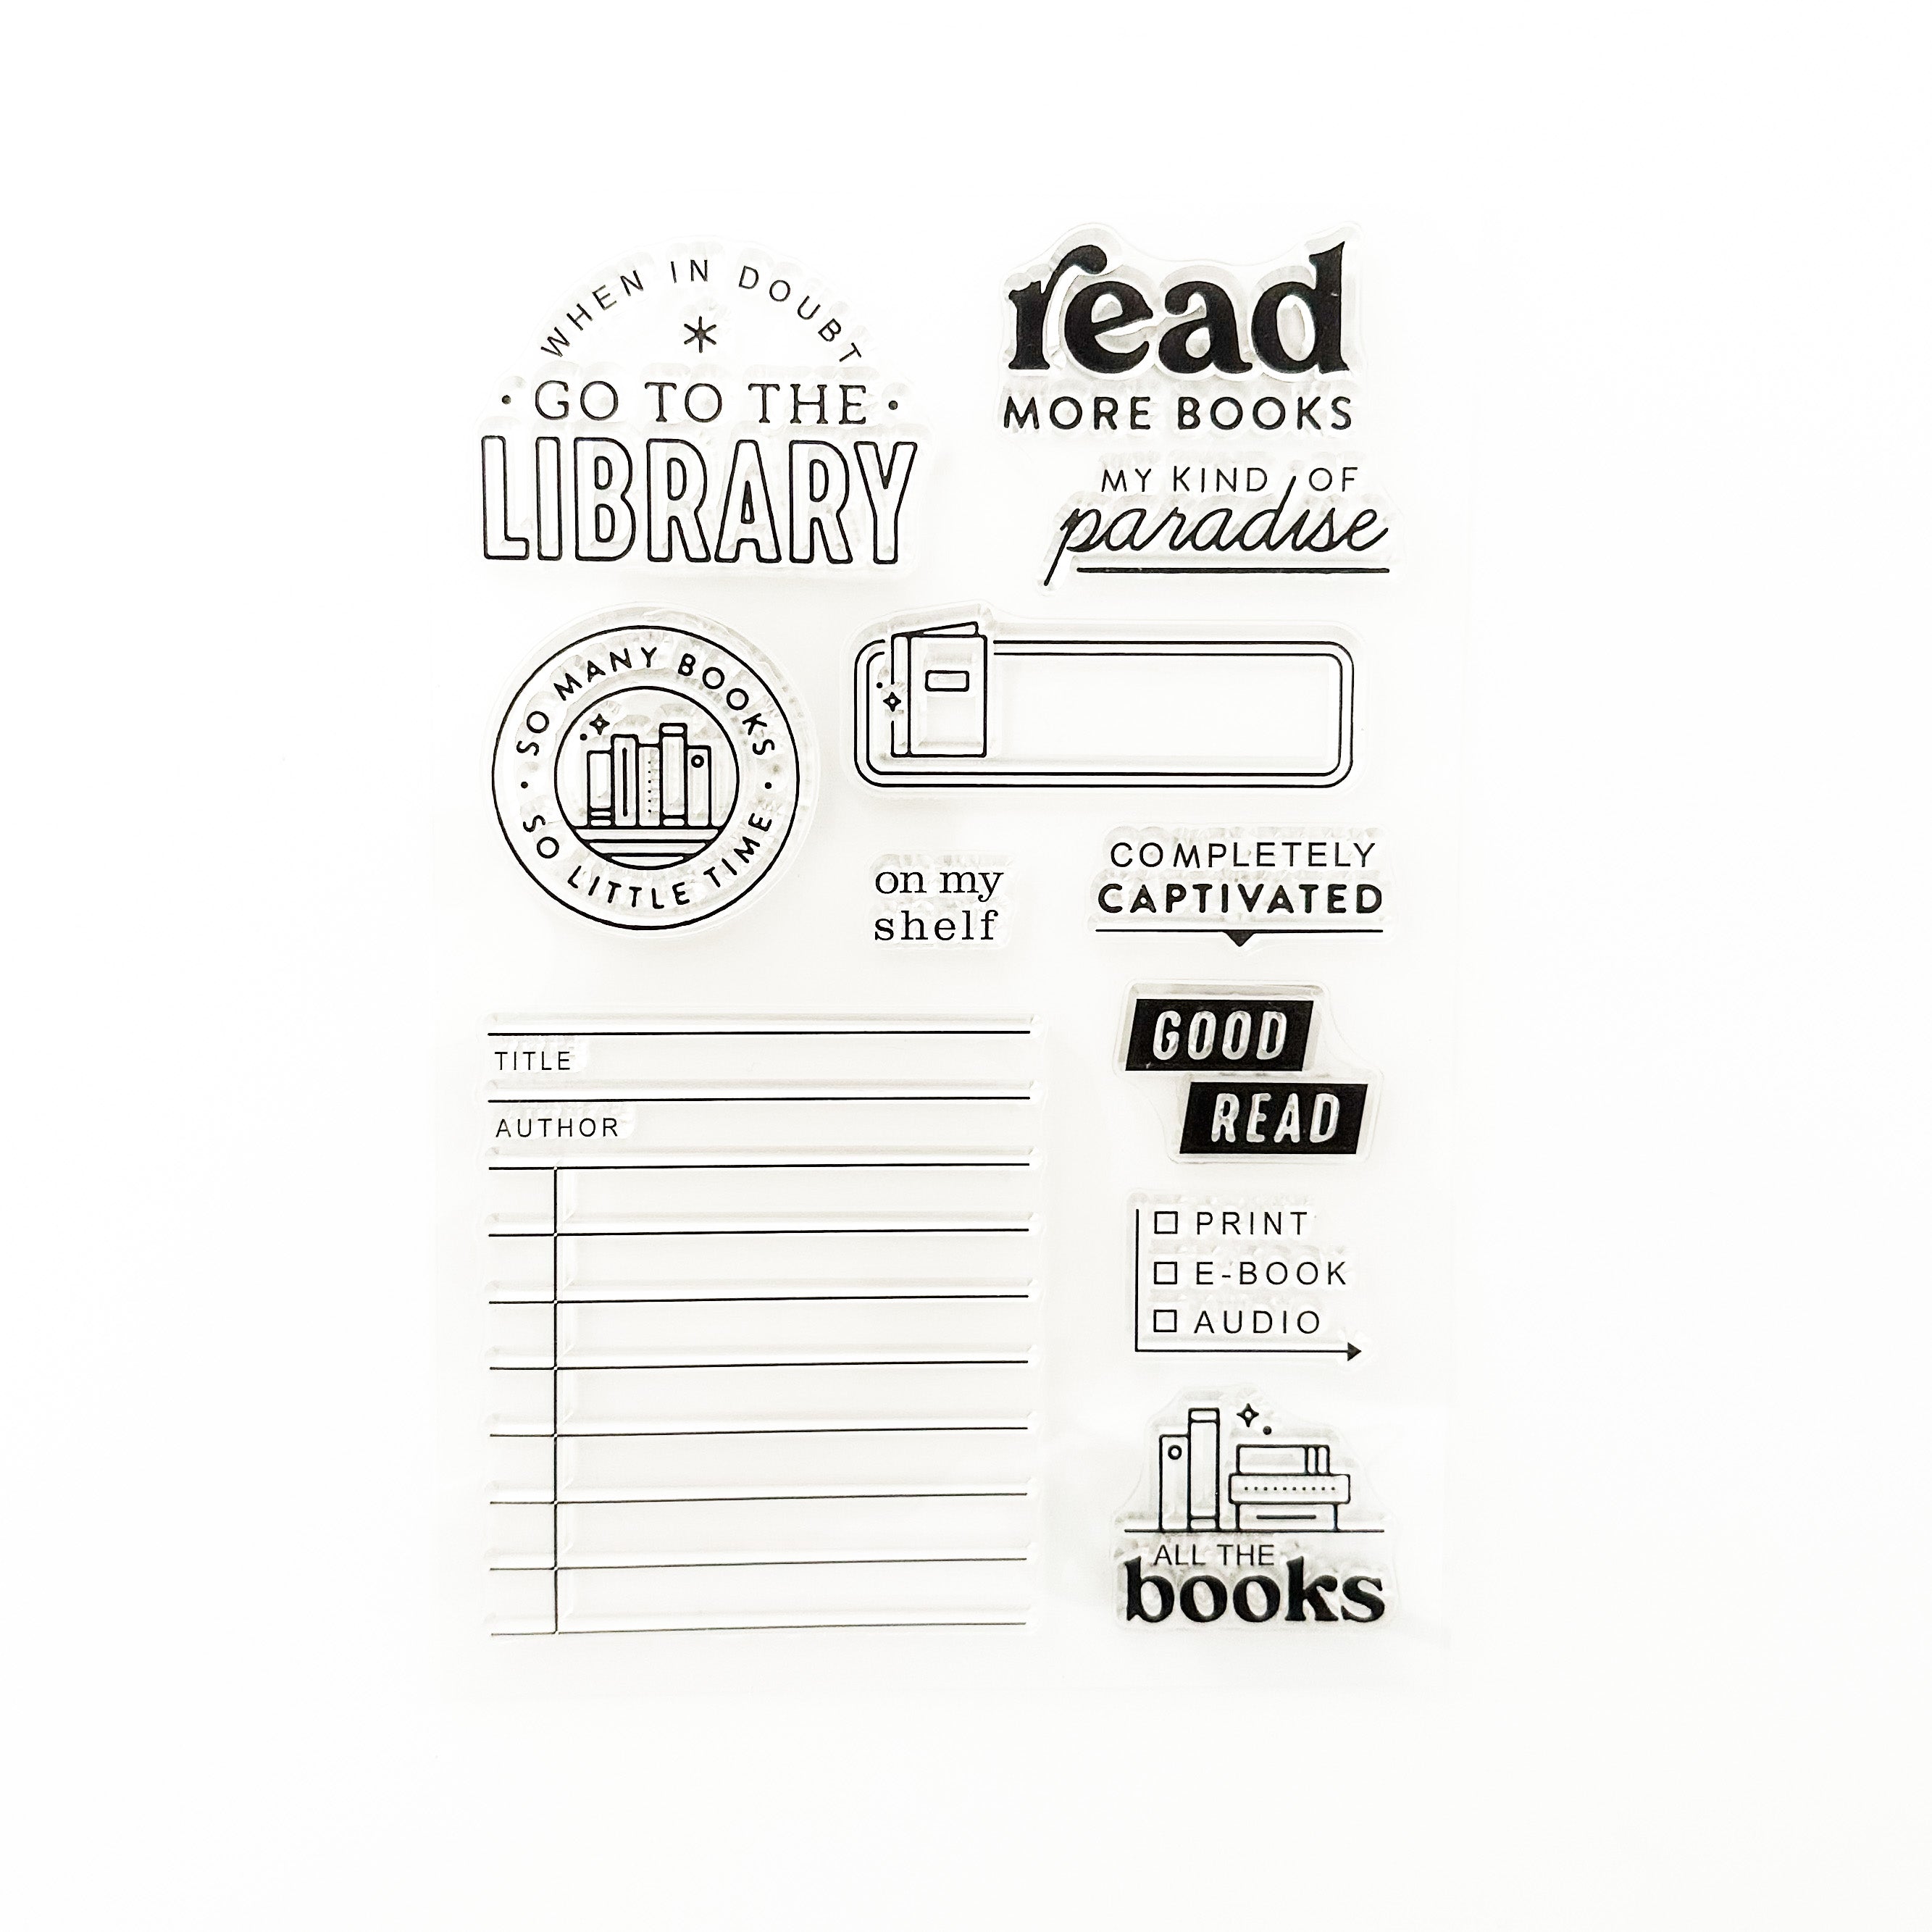 Keep track of your reading habits in style with these charming stamps. Featuring book-themed designs, these stamps are perfect for tracking reading goals, book club meetings, or simply jotting down your favorite reads. Add a literary flair to your planner and make tracking your reading progress a delightful experience. These stamps are sold at BBB Supplies Craft Shop.